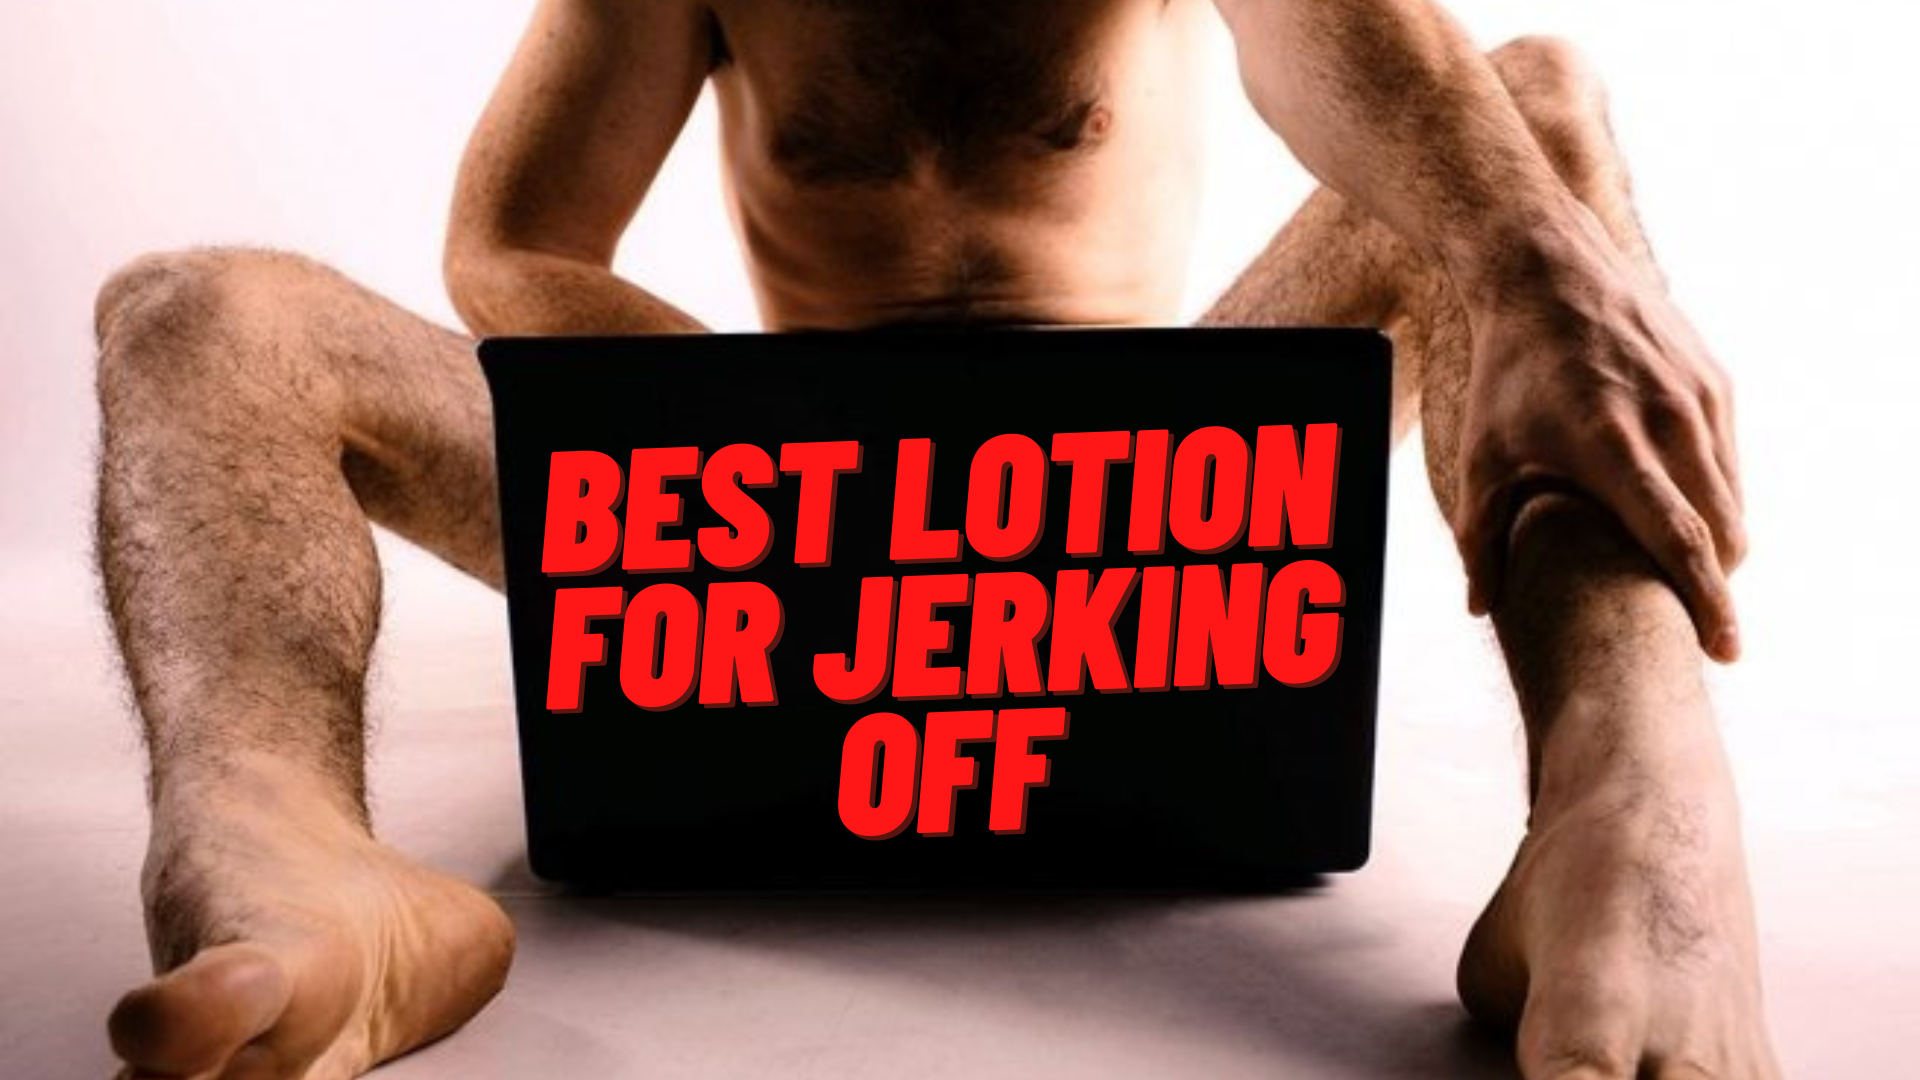 Best Lotions For Jerking Off For Better Orgasm In 2022